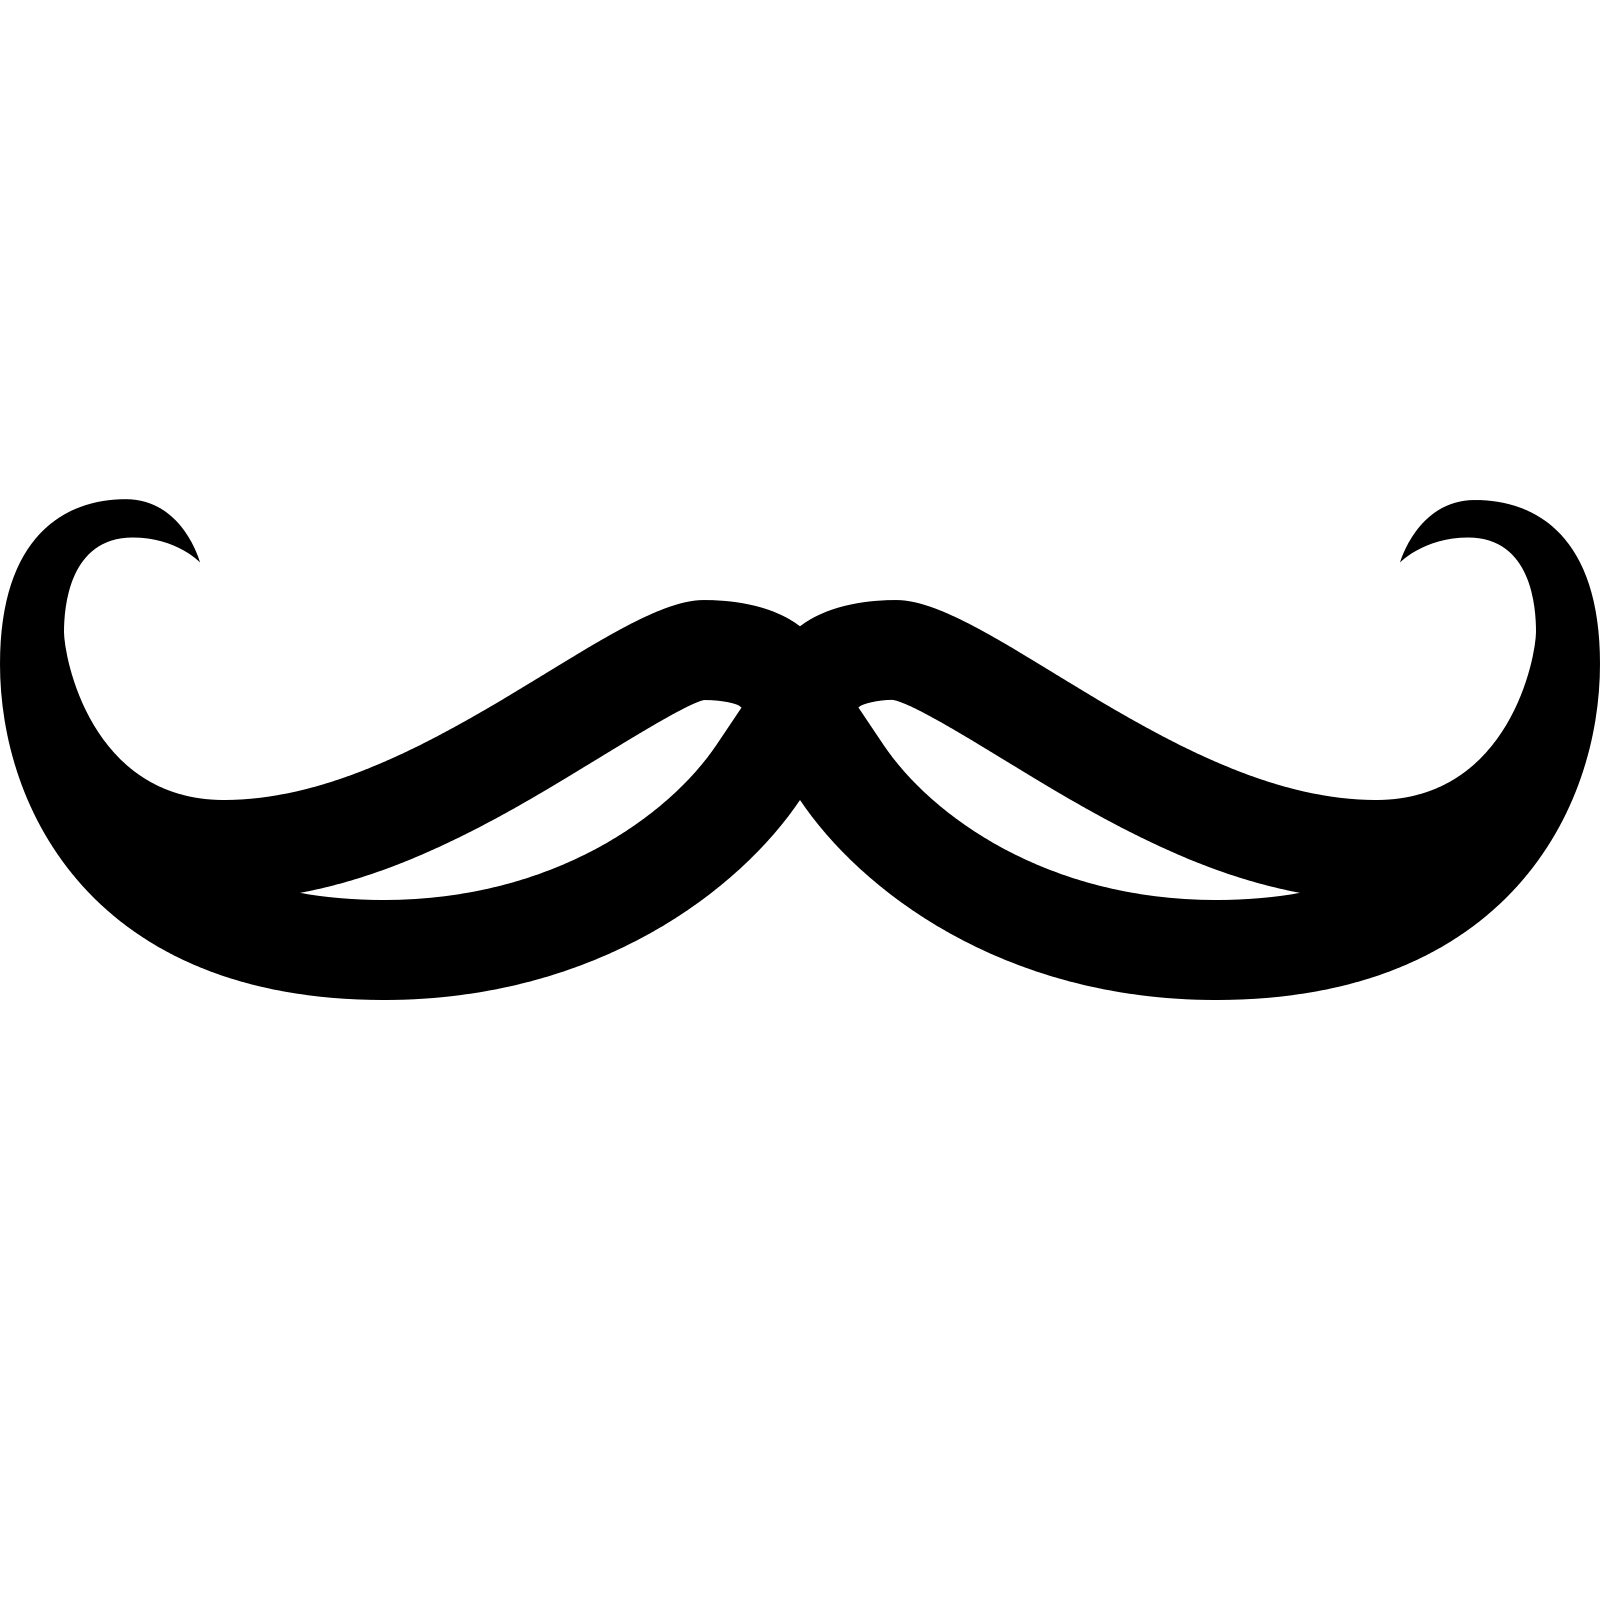 Mustache Images Black And White Jan Clipart